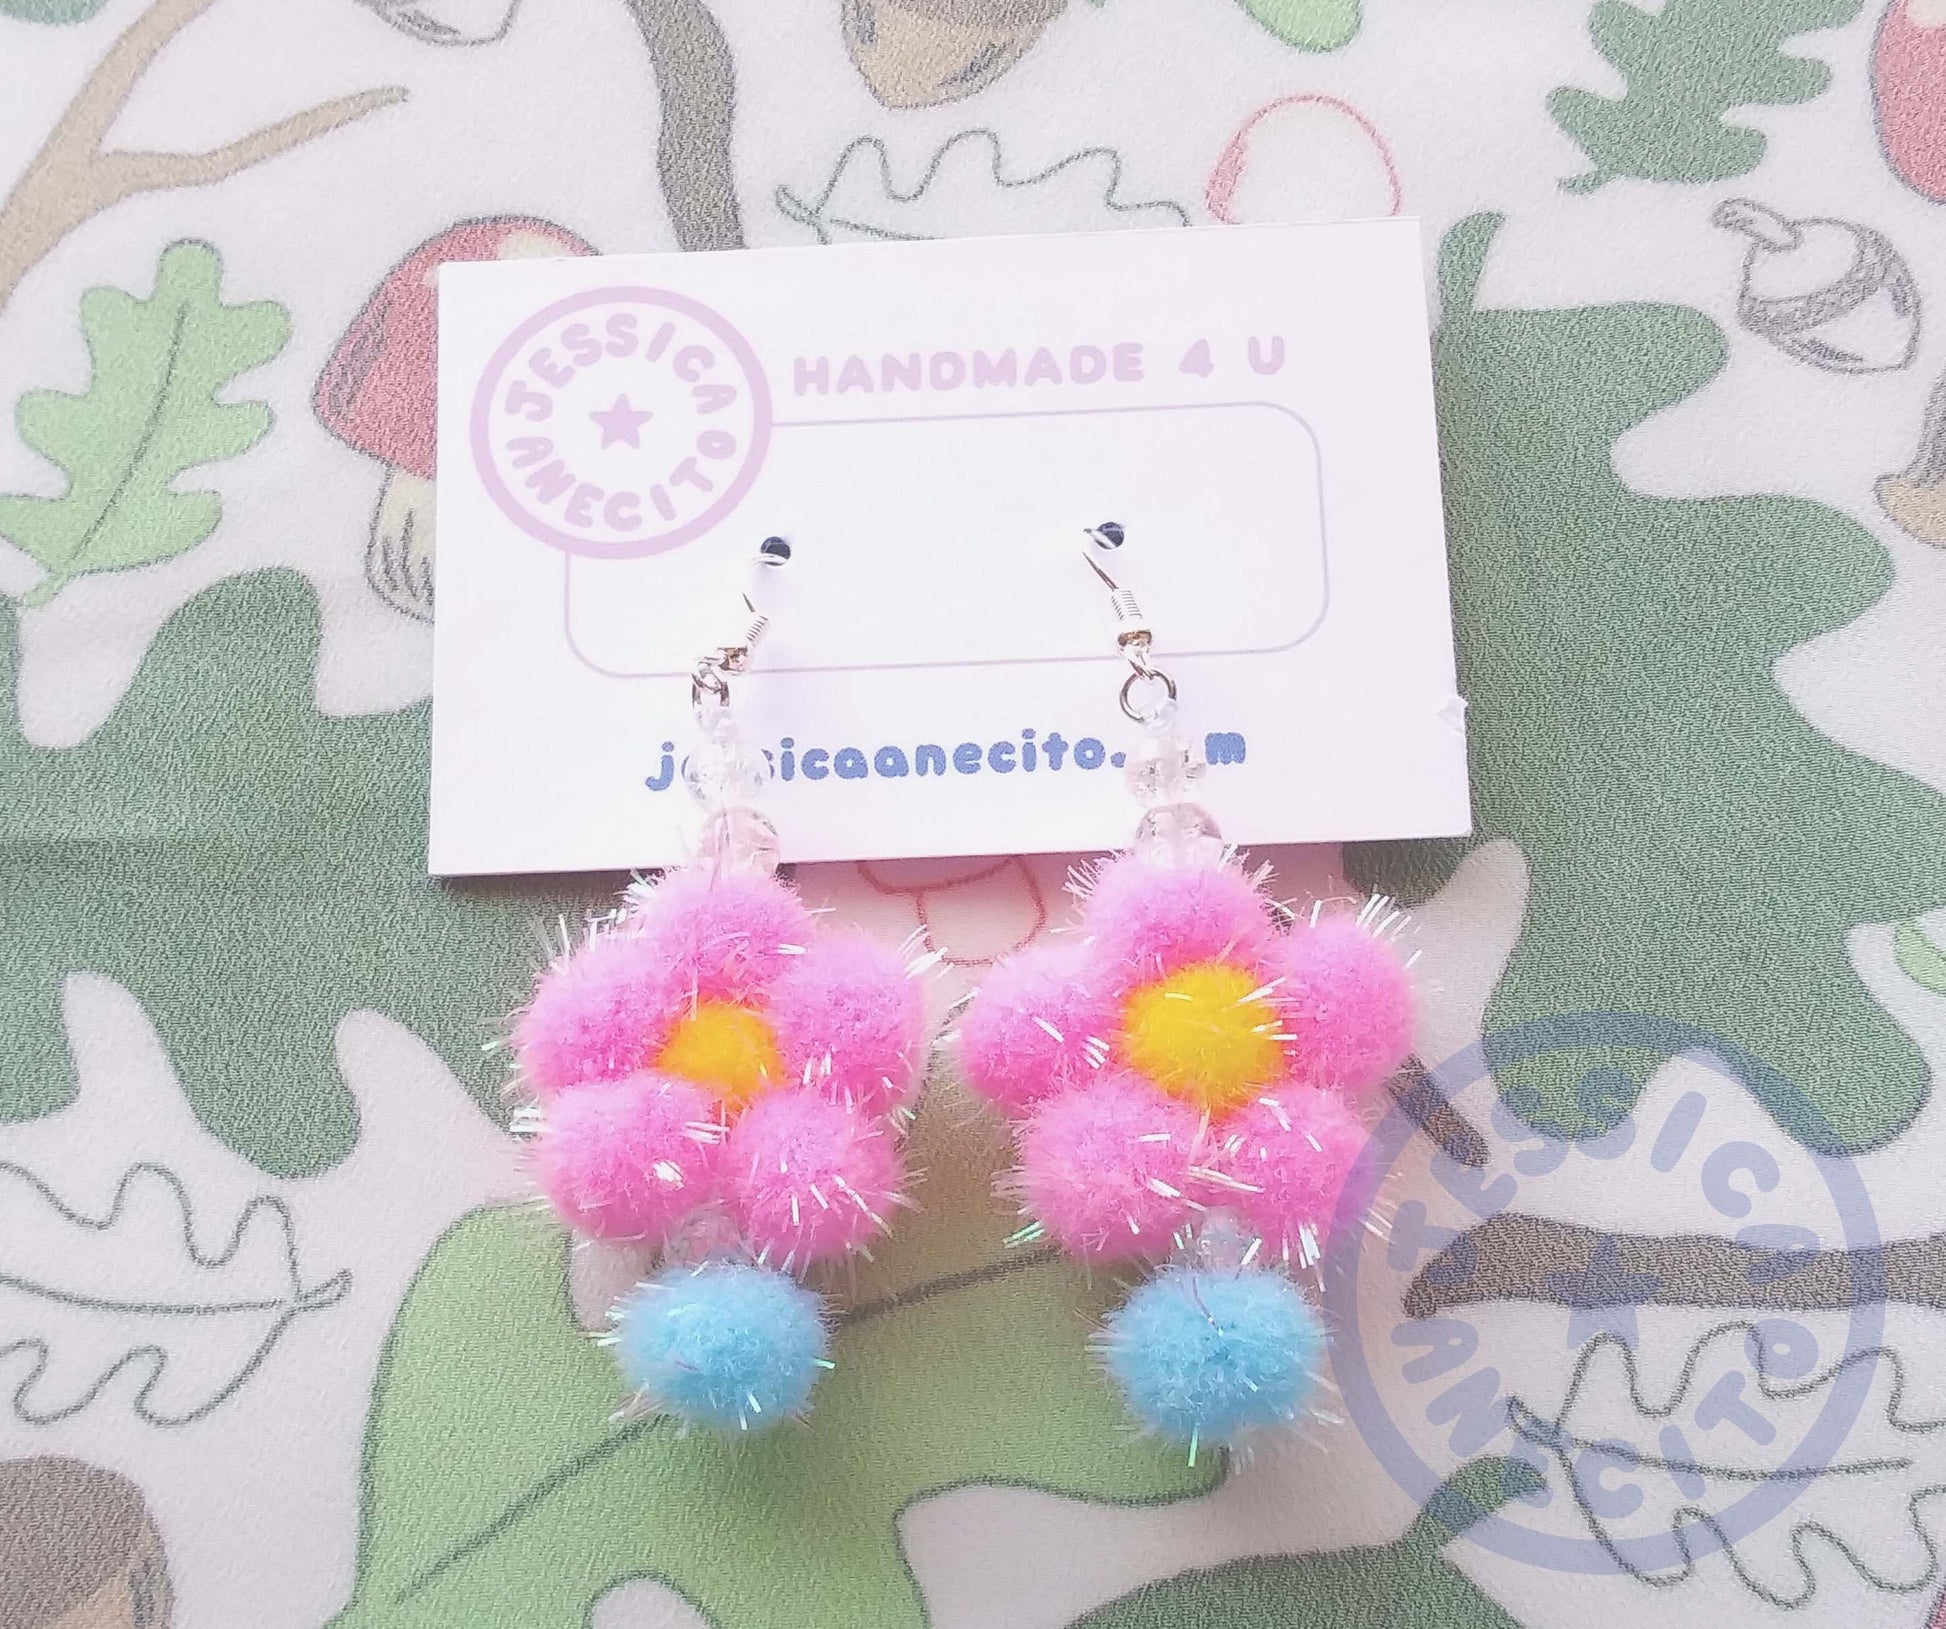 Two earrings are attached to a thick paper that reads, "Handmade 4 u" and "jessicaanecito.com". A logo is on the corner that is shaped like a circle and has the name "Jessica Anecito" going around the inside with a star in the center. The earrings are made of a yellow pom pom surrounded by five pink pom poms to make a flower shape. The flower has a clear bead and a blue pom pom hanging off the bottom and two clear beads on top connecting it to an earring hook. 